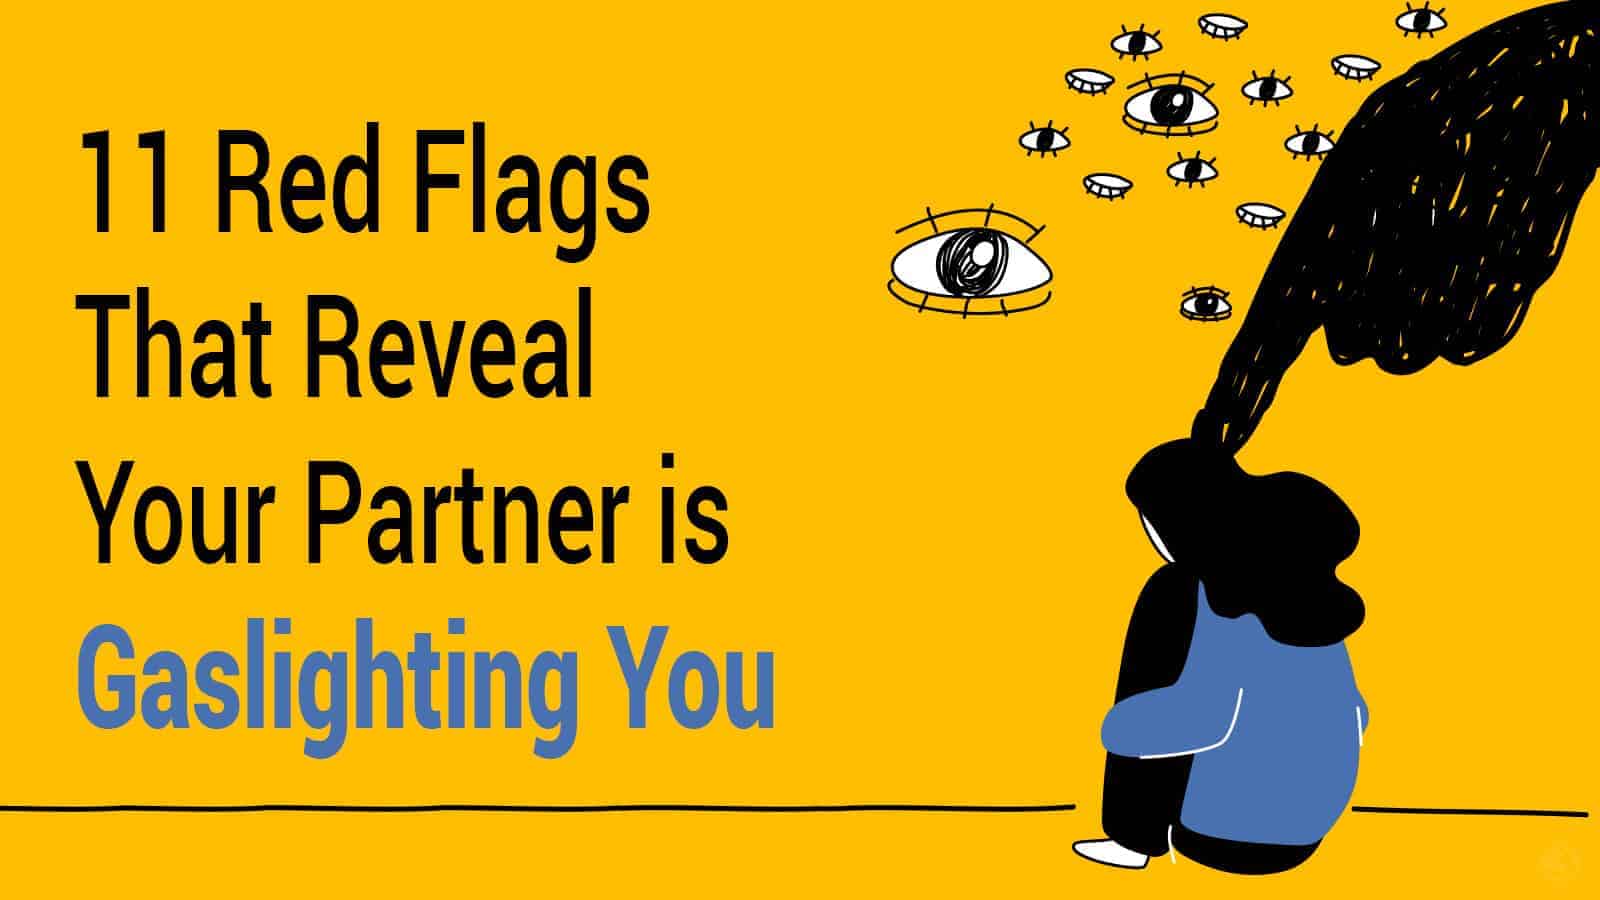 11 Red Flags That Reveal Your Partner is Gaslighting You  